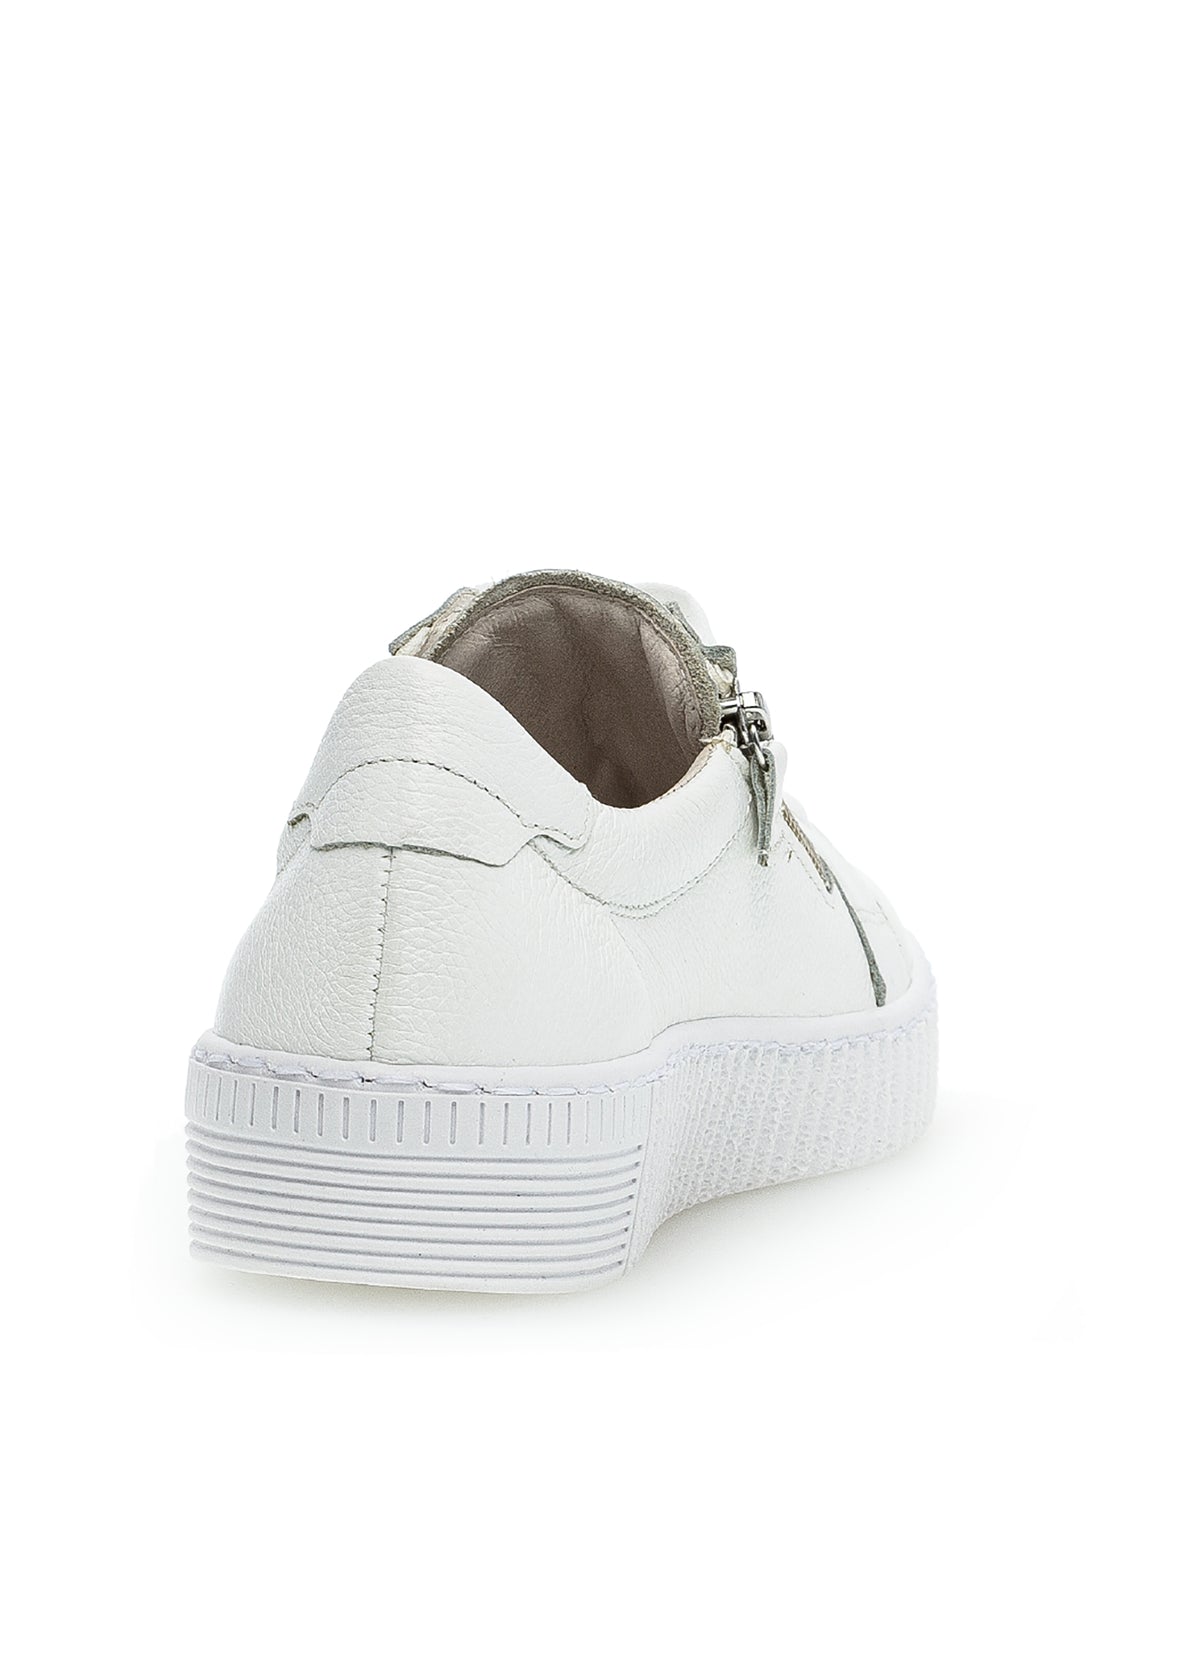 Sneakers with a thick sole - white leather